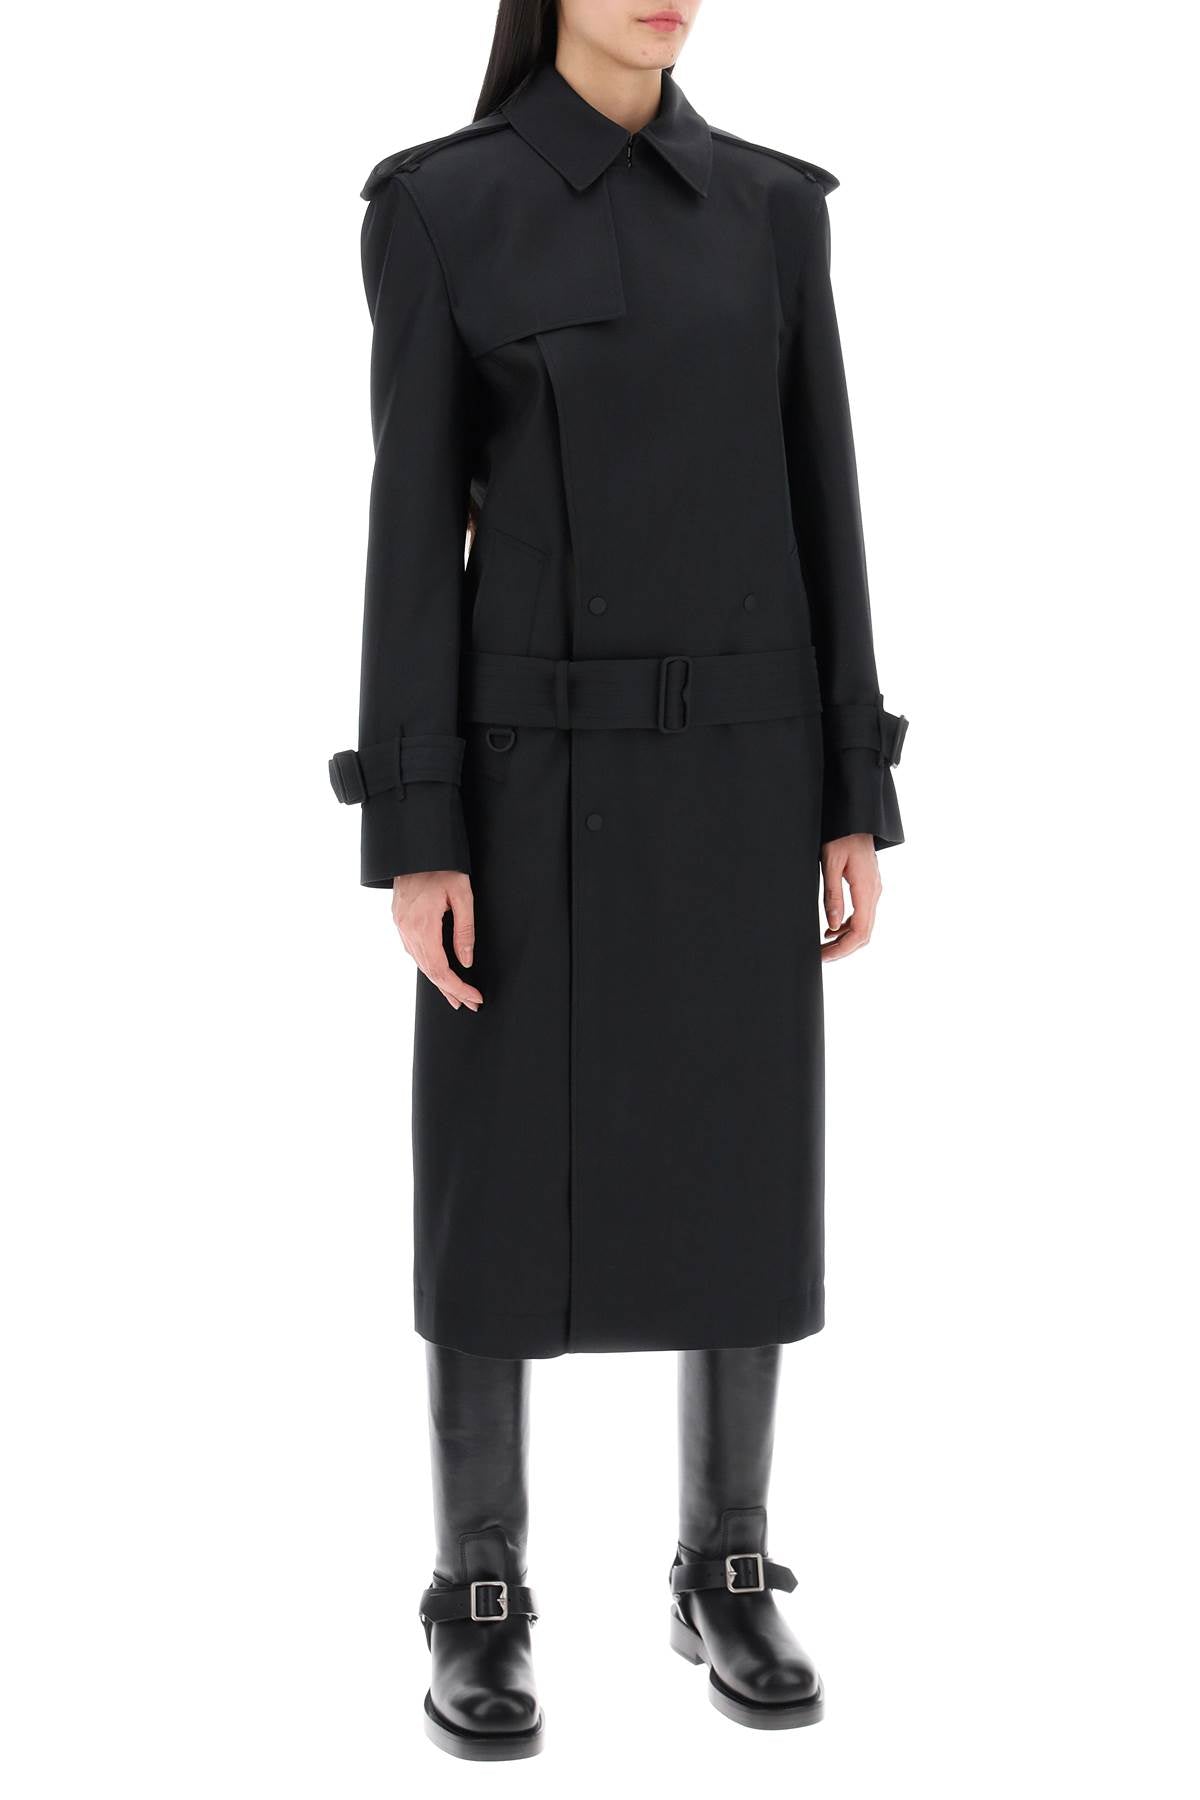 Burberry double-breasted silk twill trench coat-women > clothing > jackets-Burberry-Urbanheer